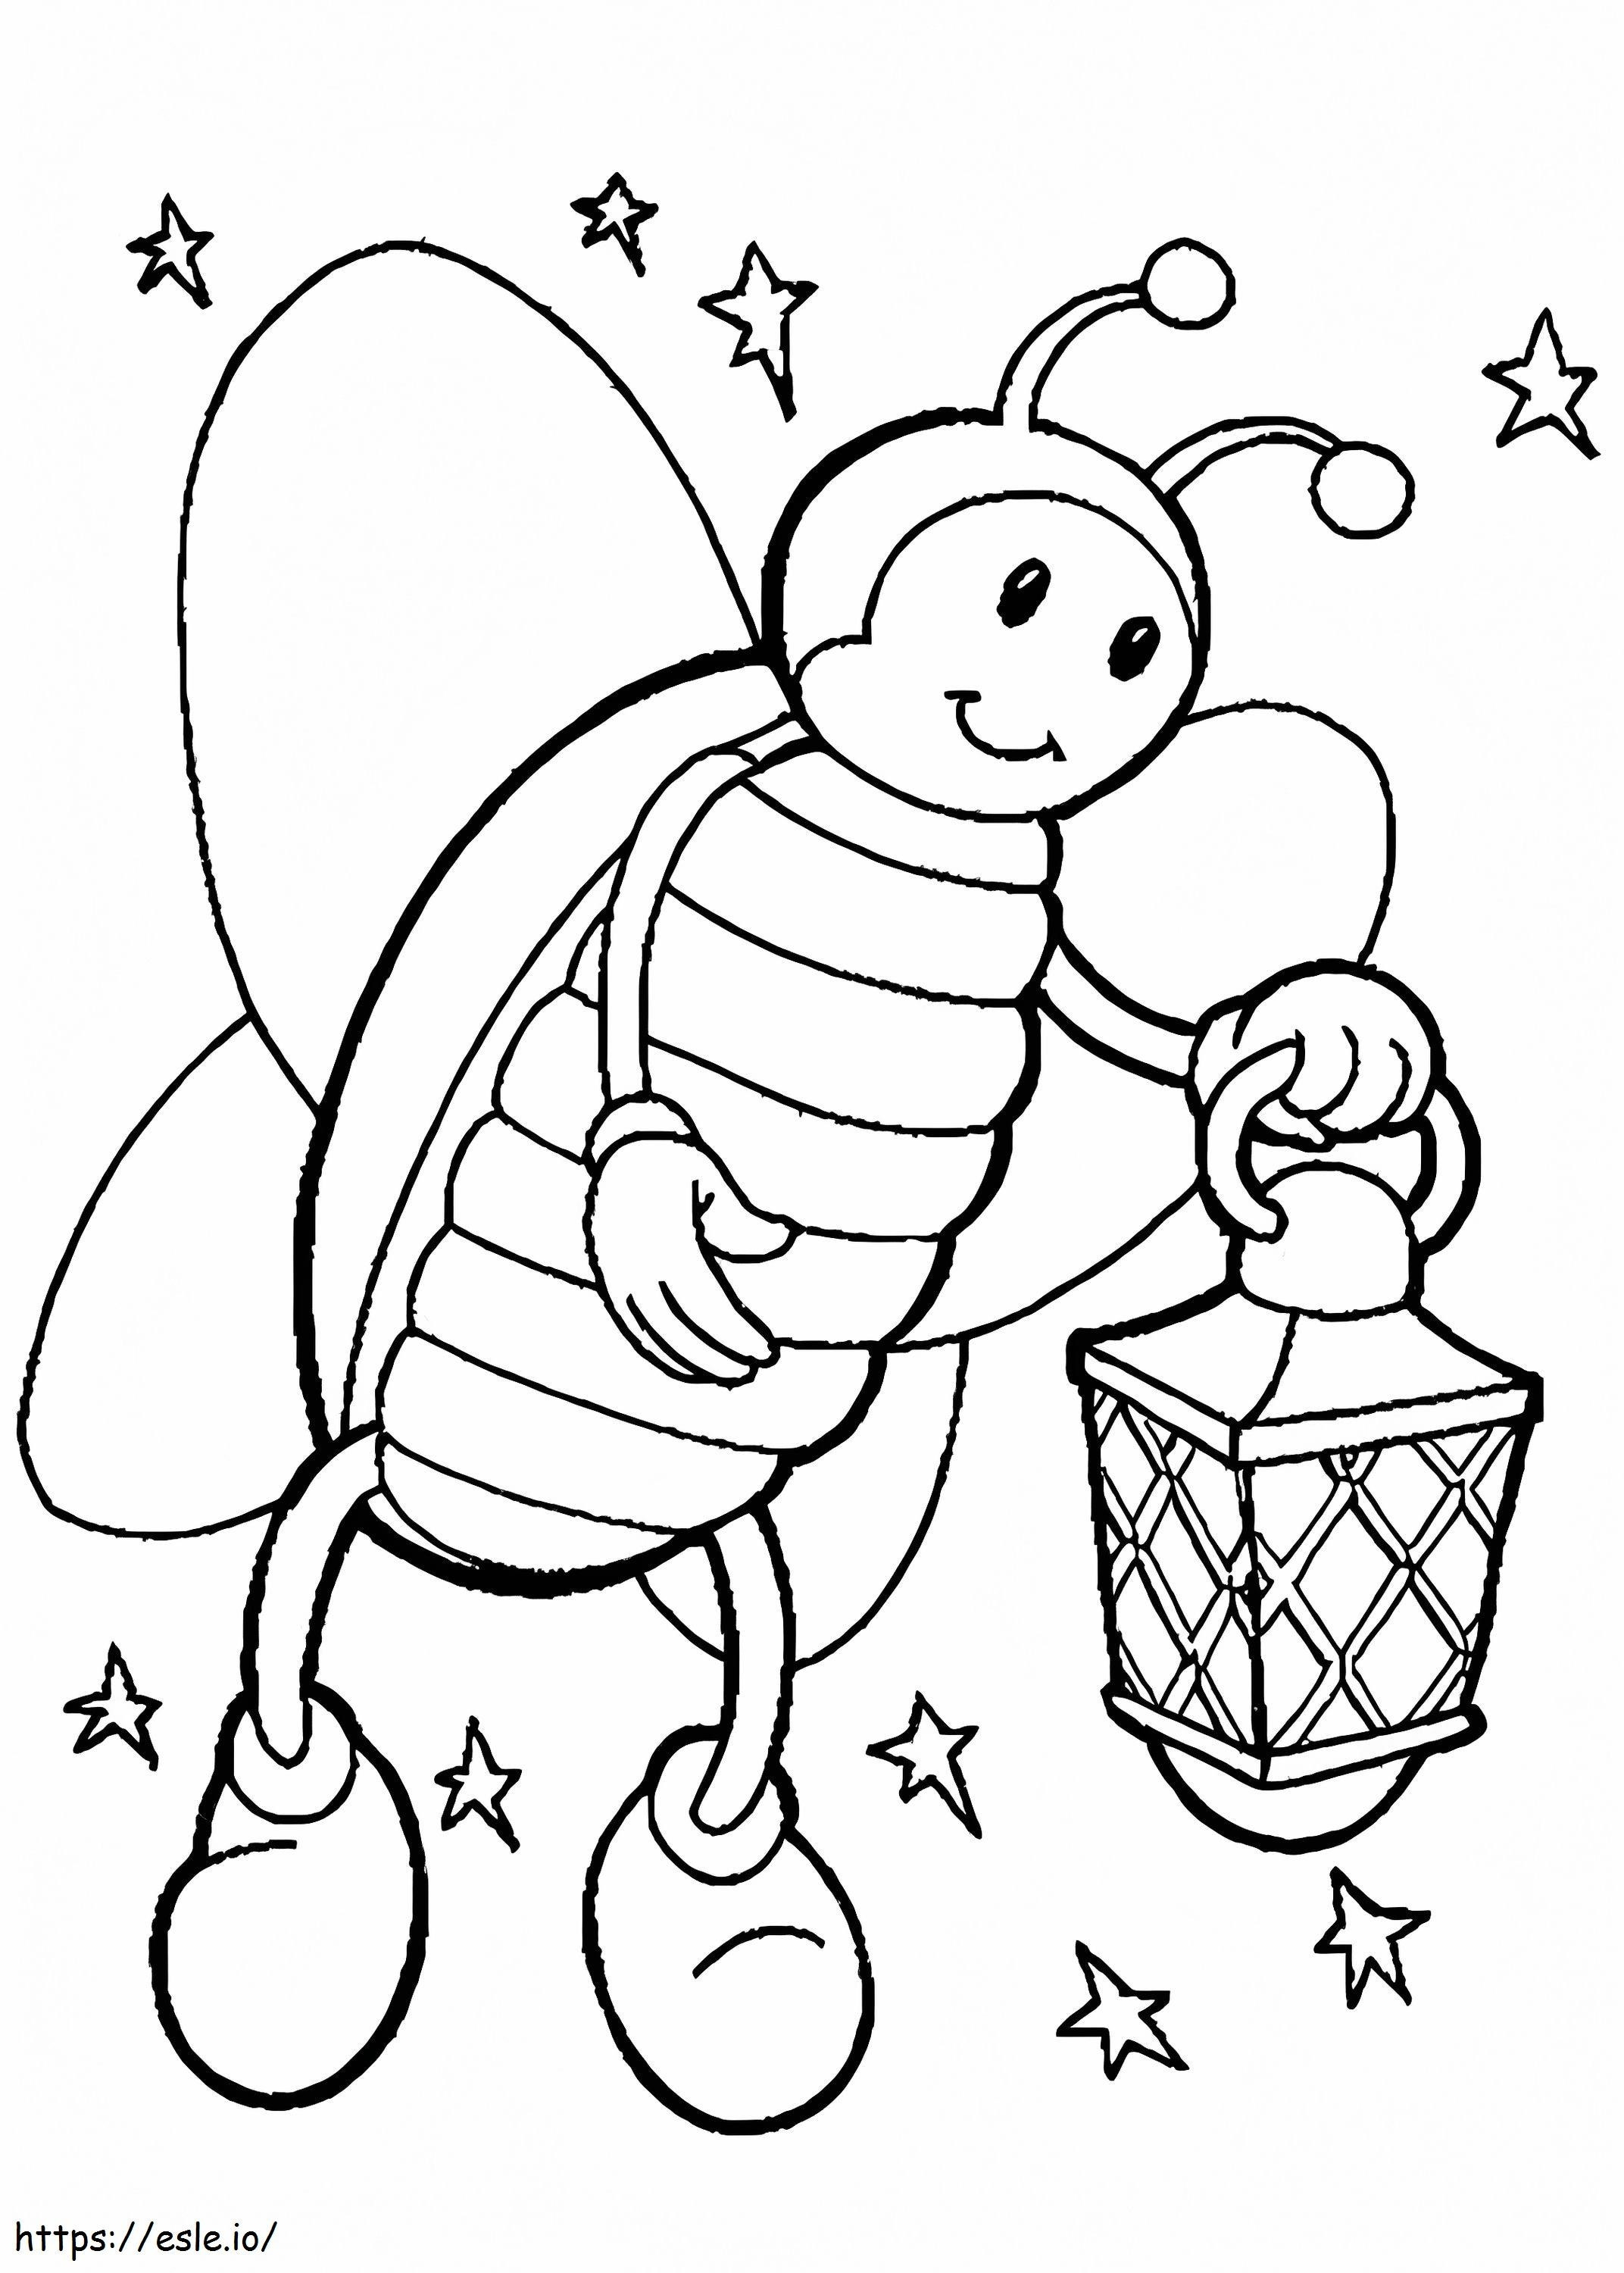 Firefly With A Lamp coloring page